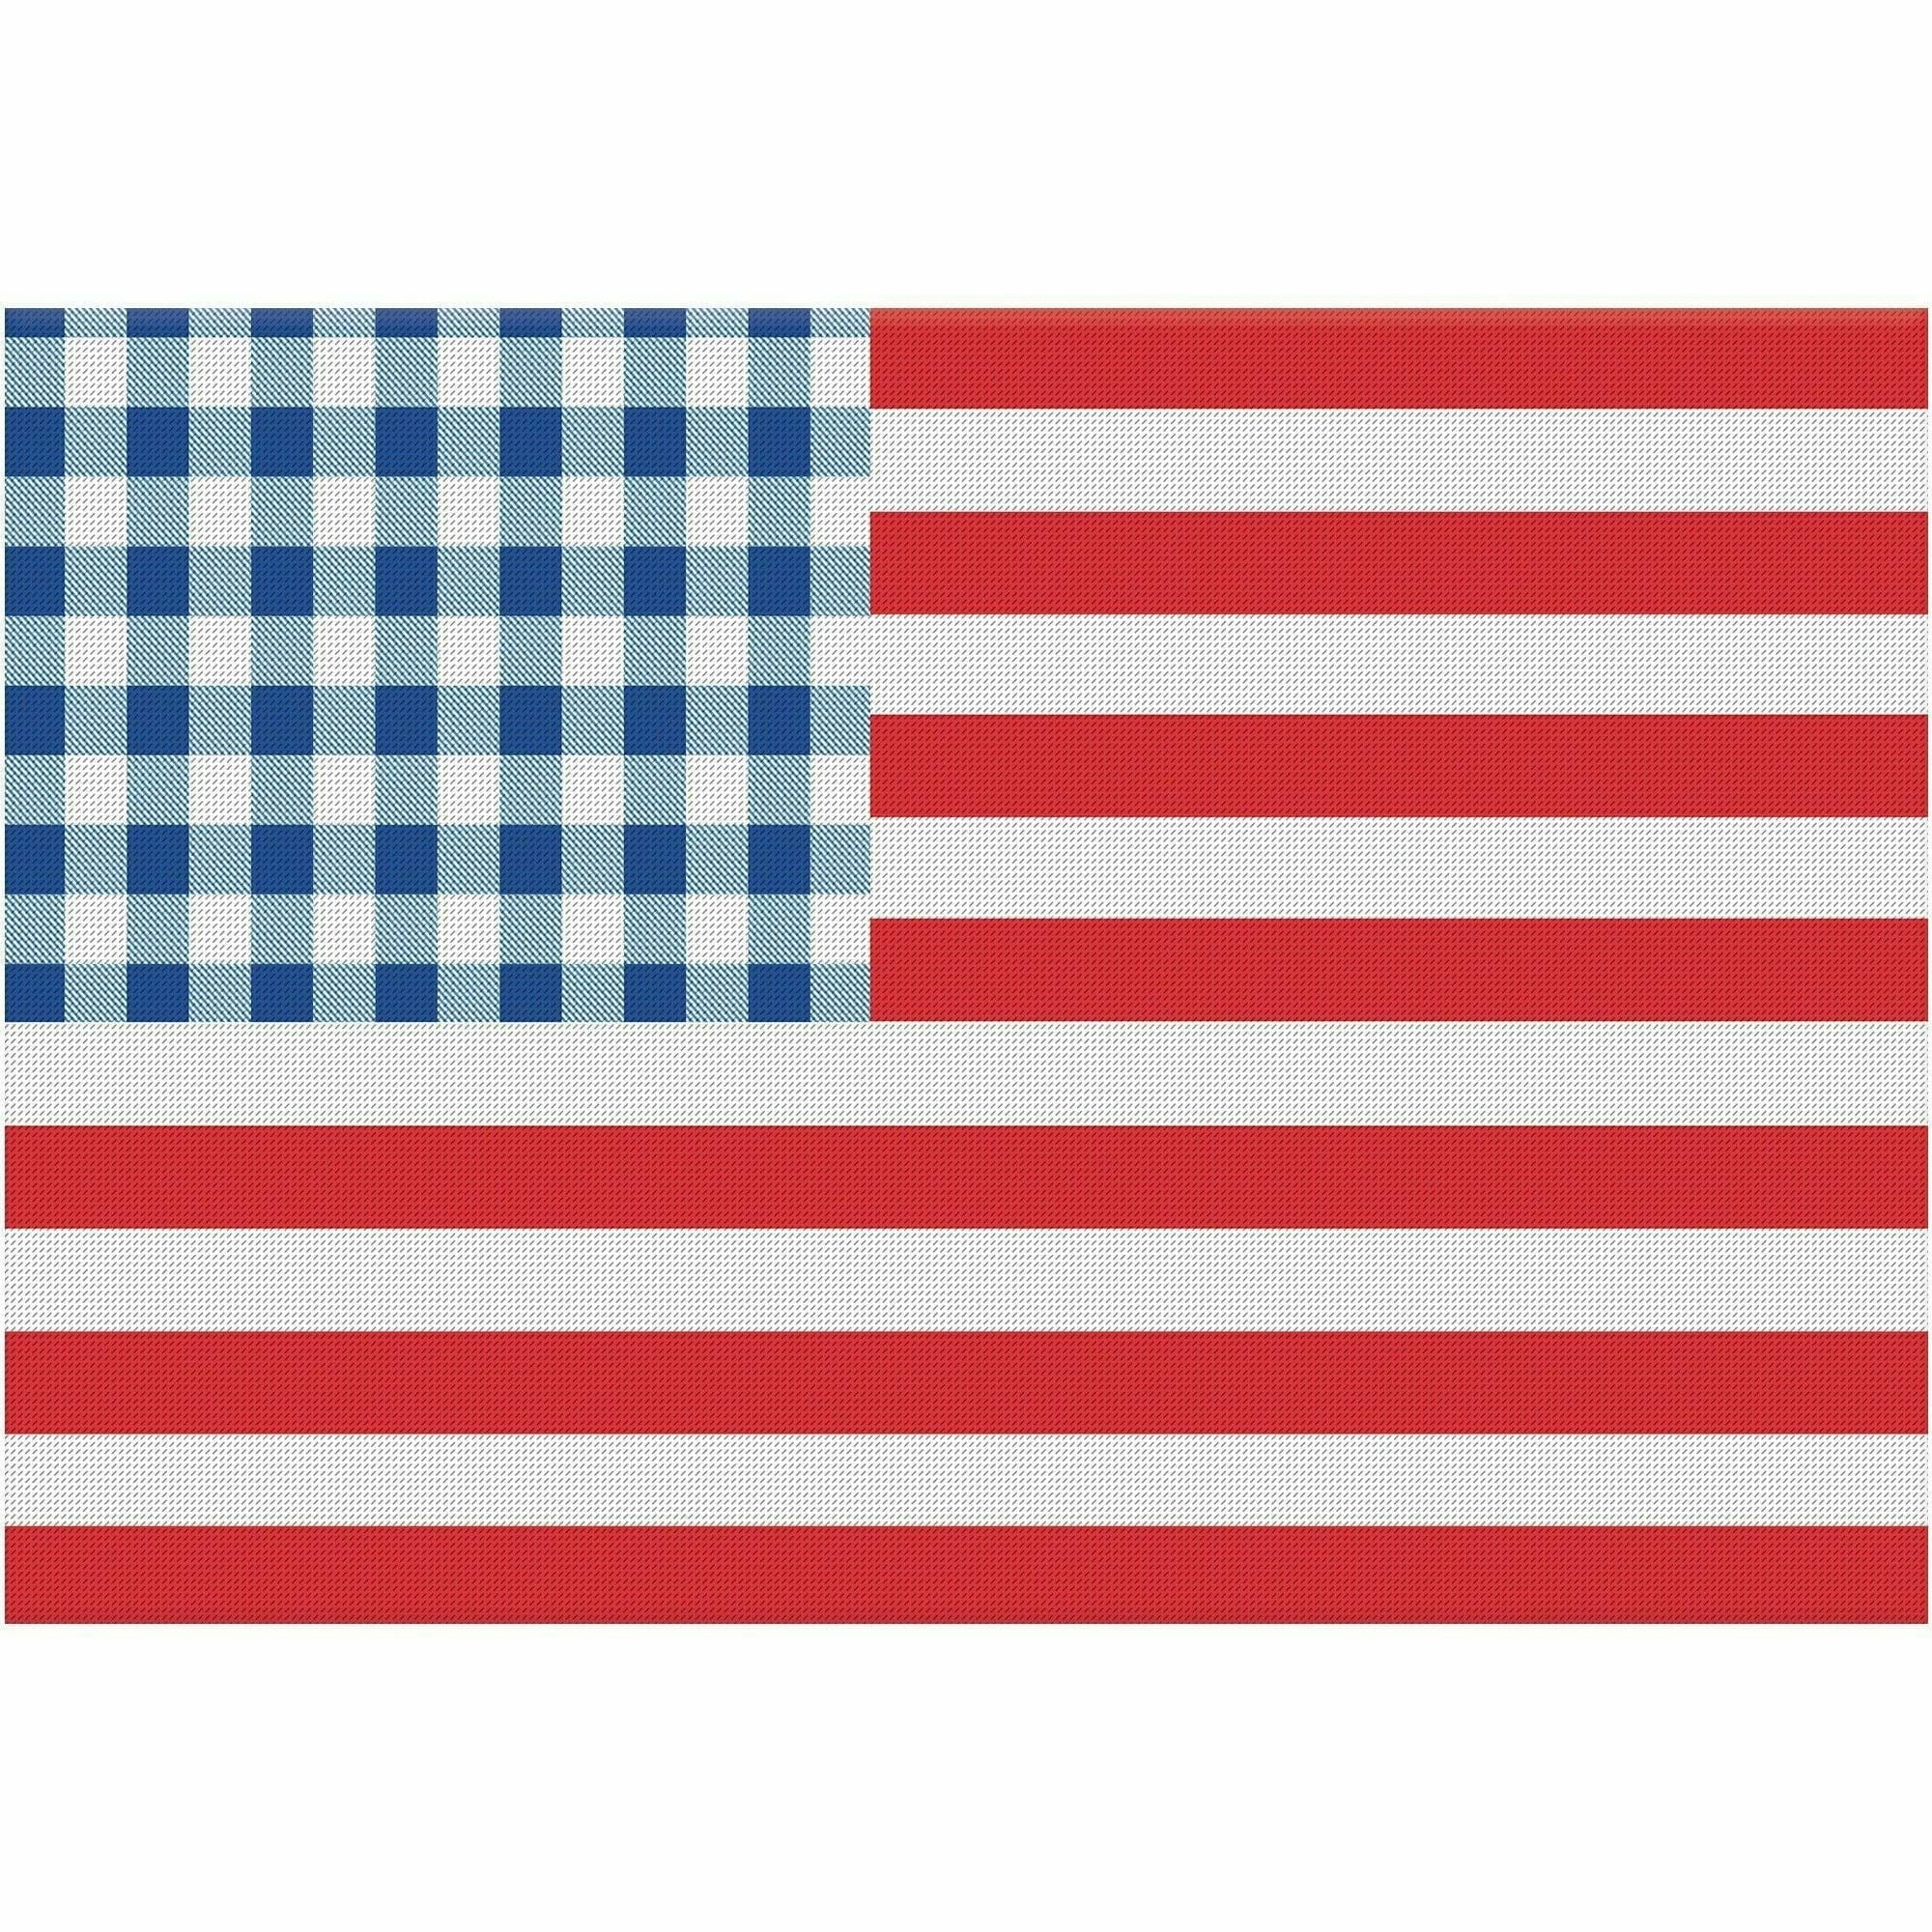 Amscan HOLIDAY: PATRIOTIC American Flag Placemat